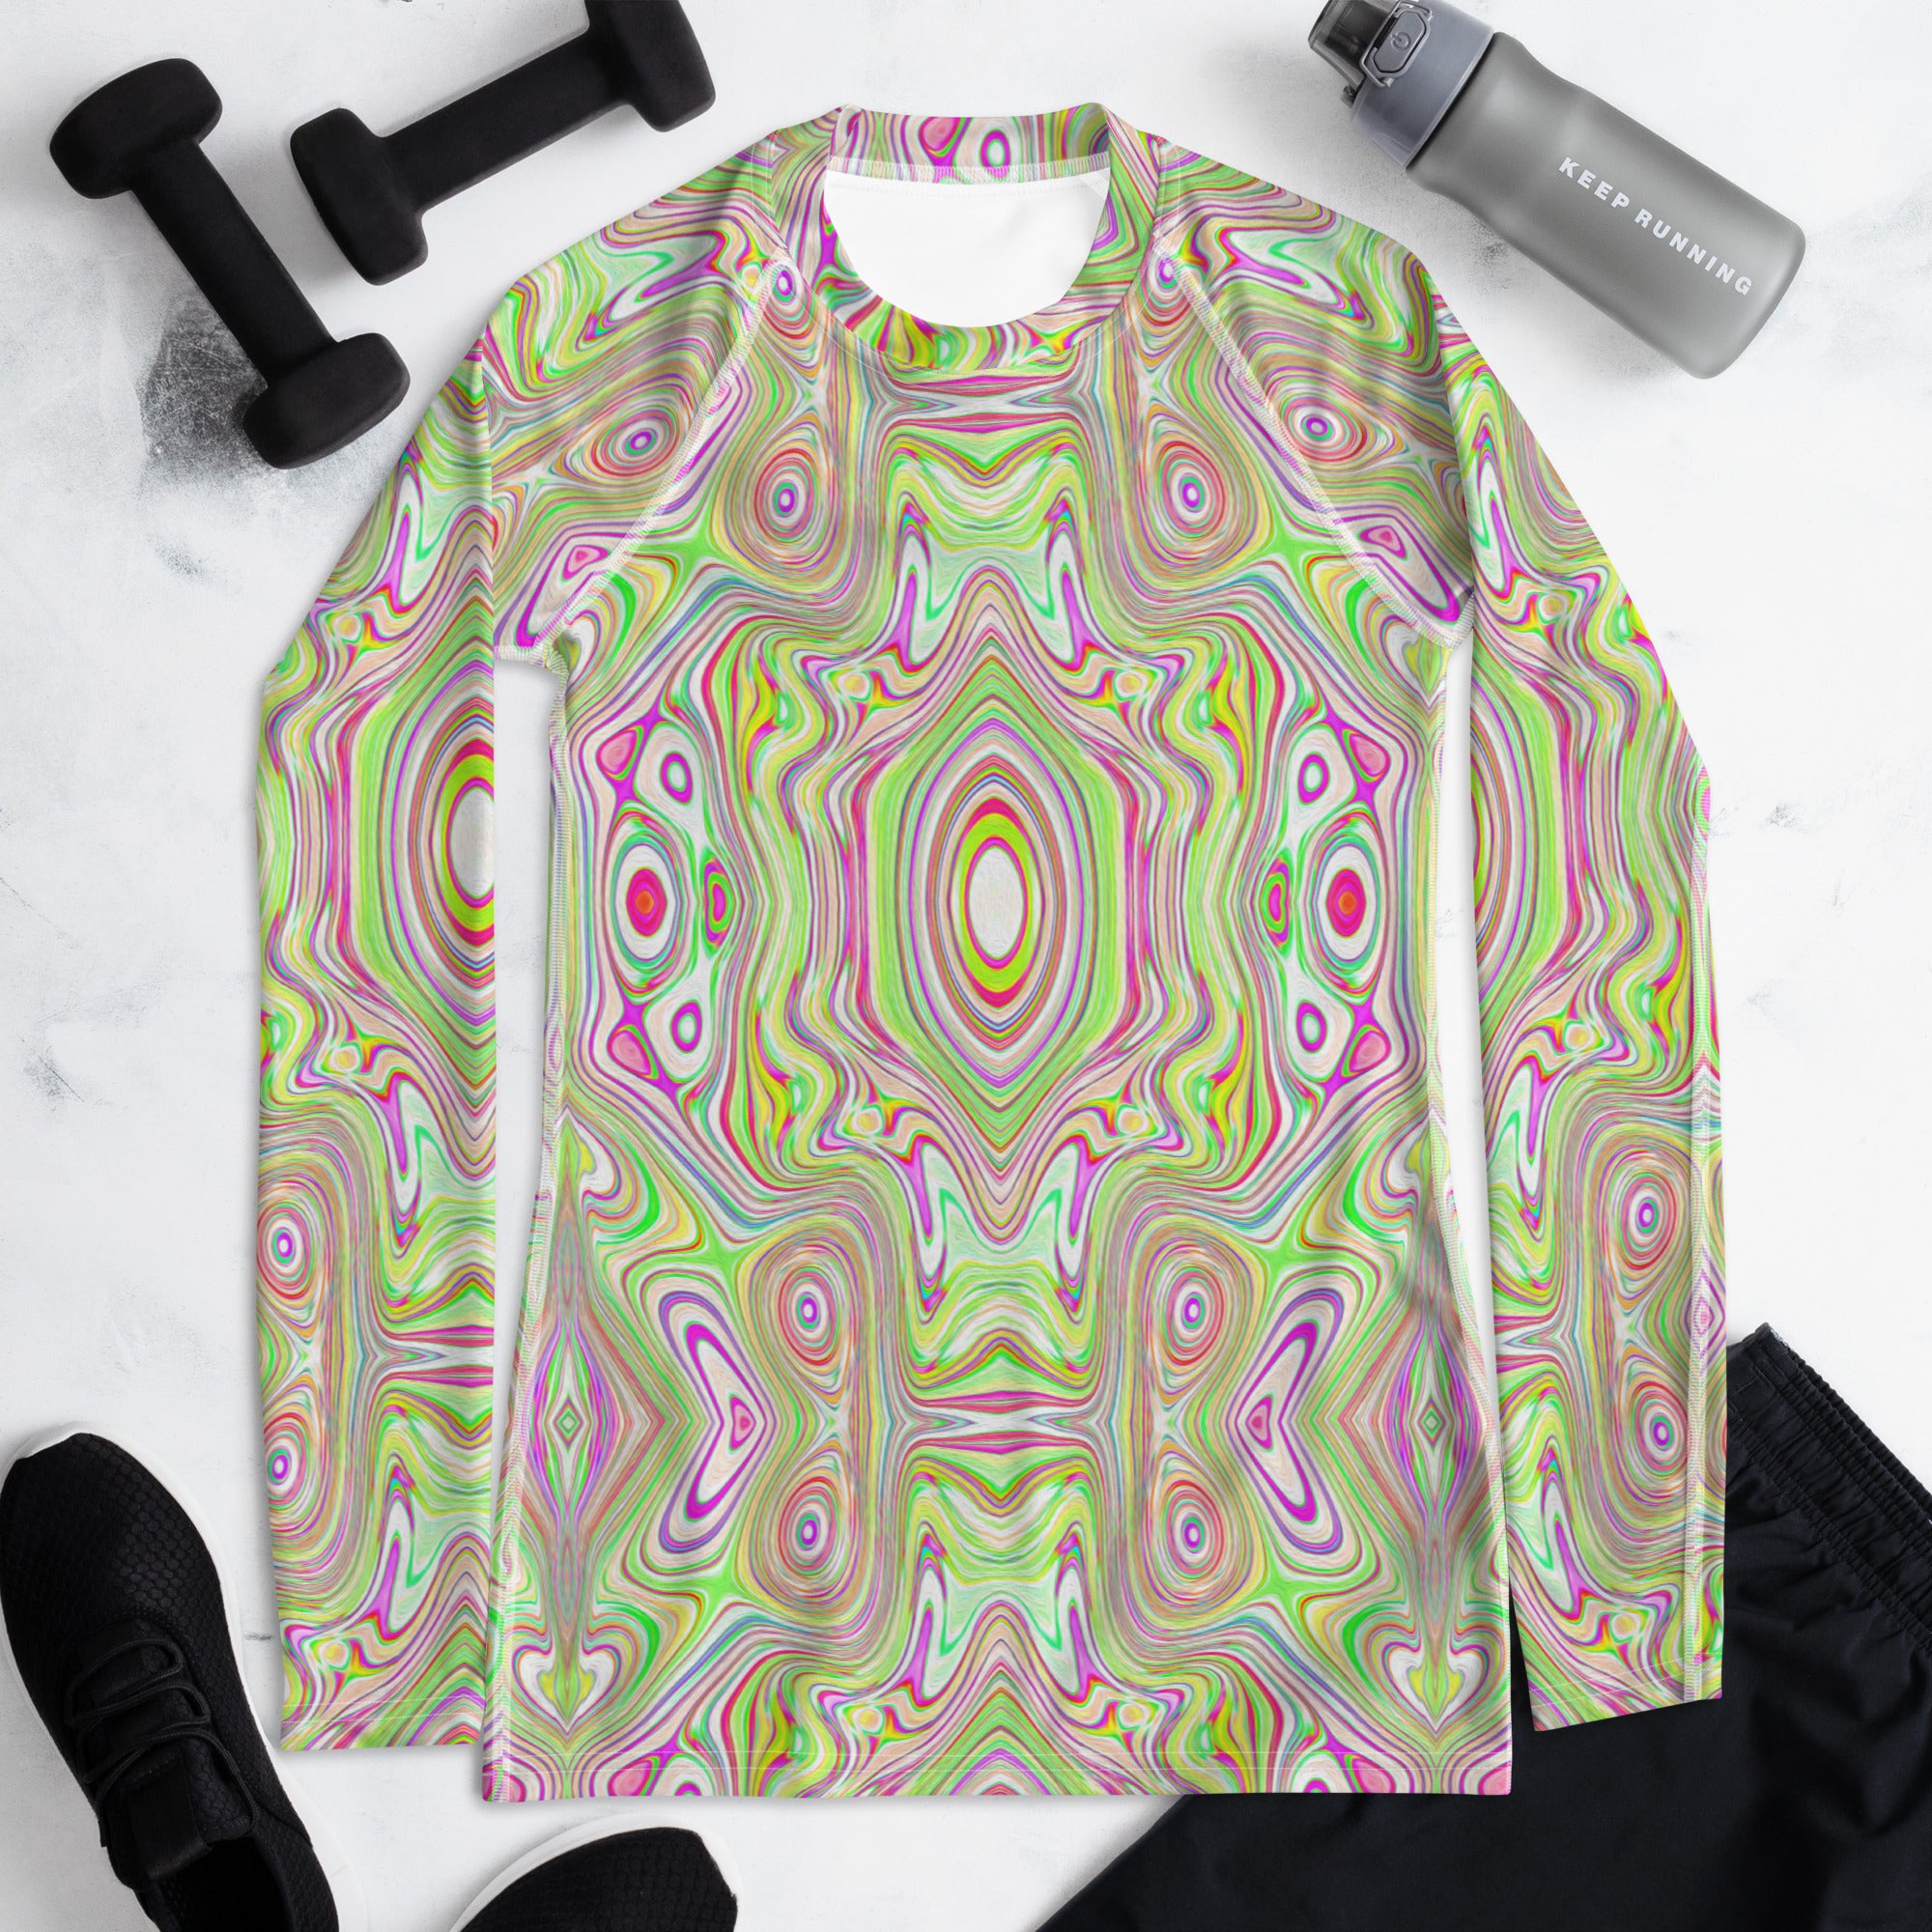 Women's Rash Guard Shirts, Trippy Retro Pink and Lime Green Abstract Pattern